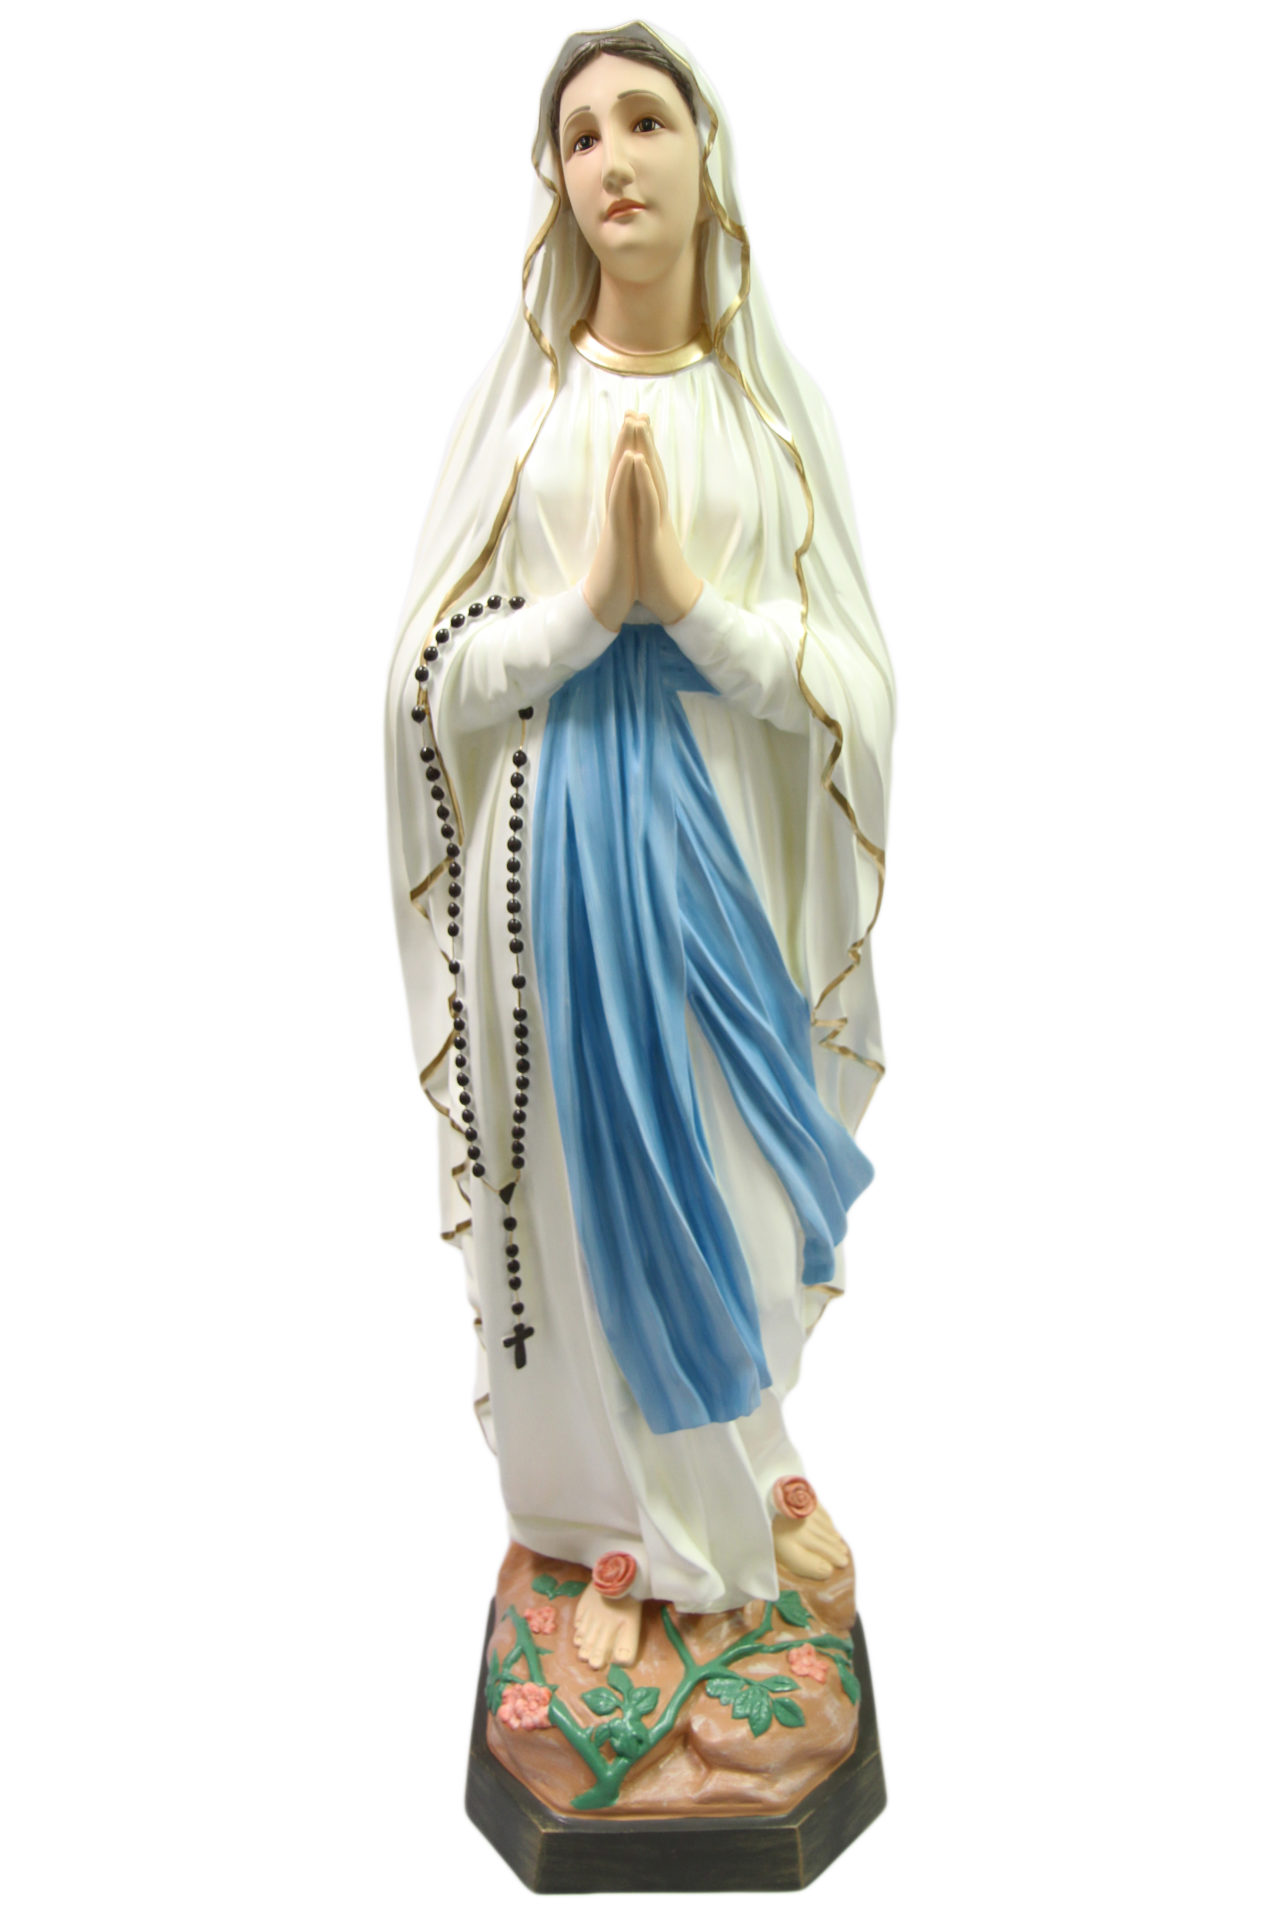 48″ Our Lady of Lourdes